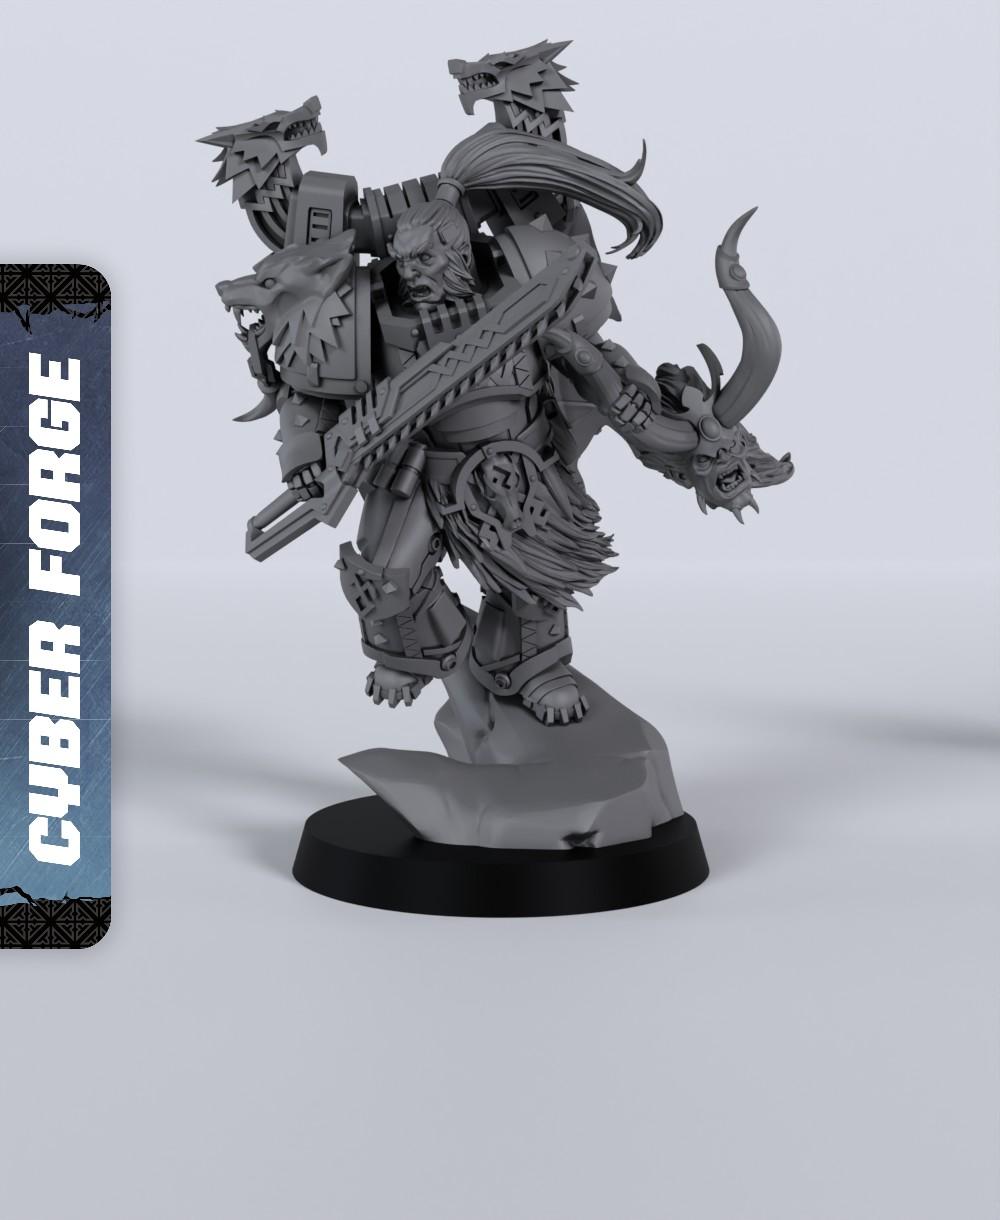 Thor - With Free Cyberpunk Warhammer - 40k Sci-Fi Gift Ideas for RPG and Wargamers 3d model